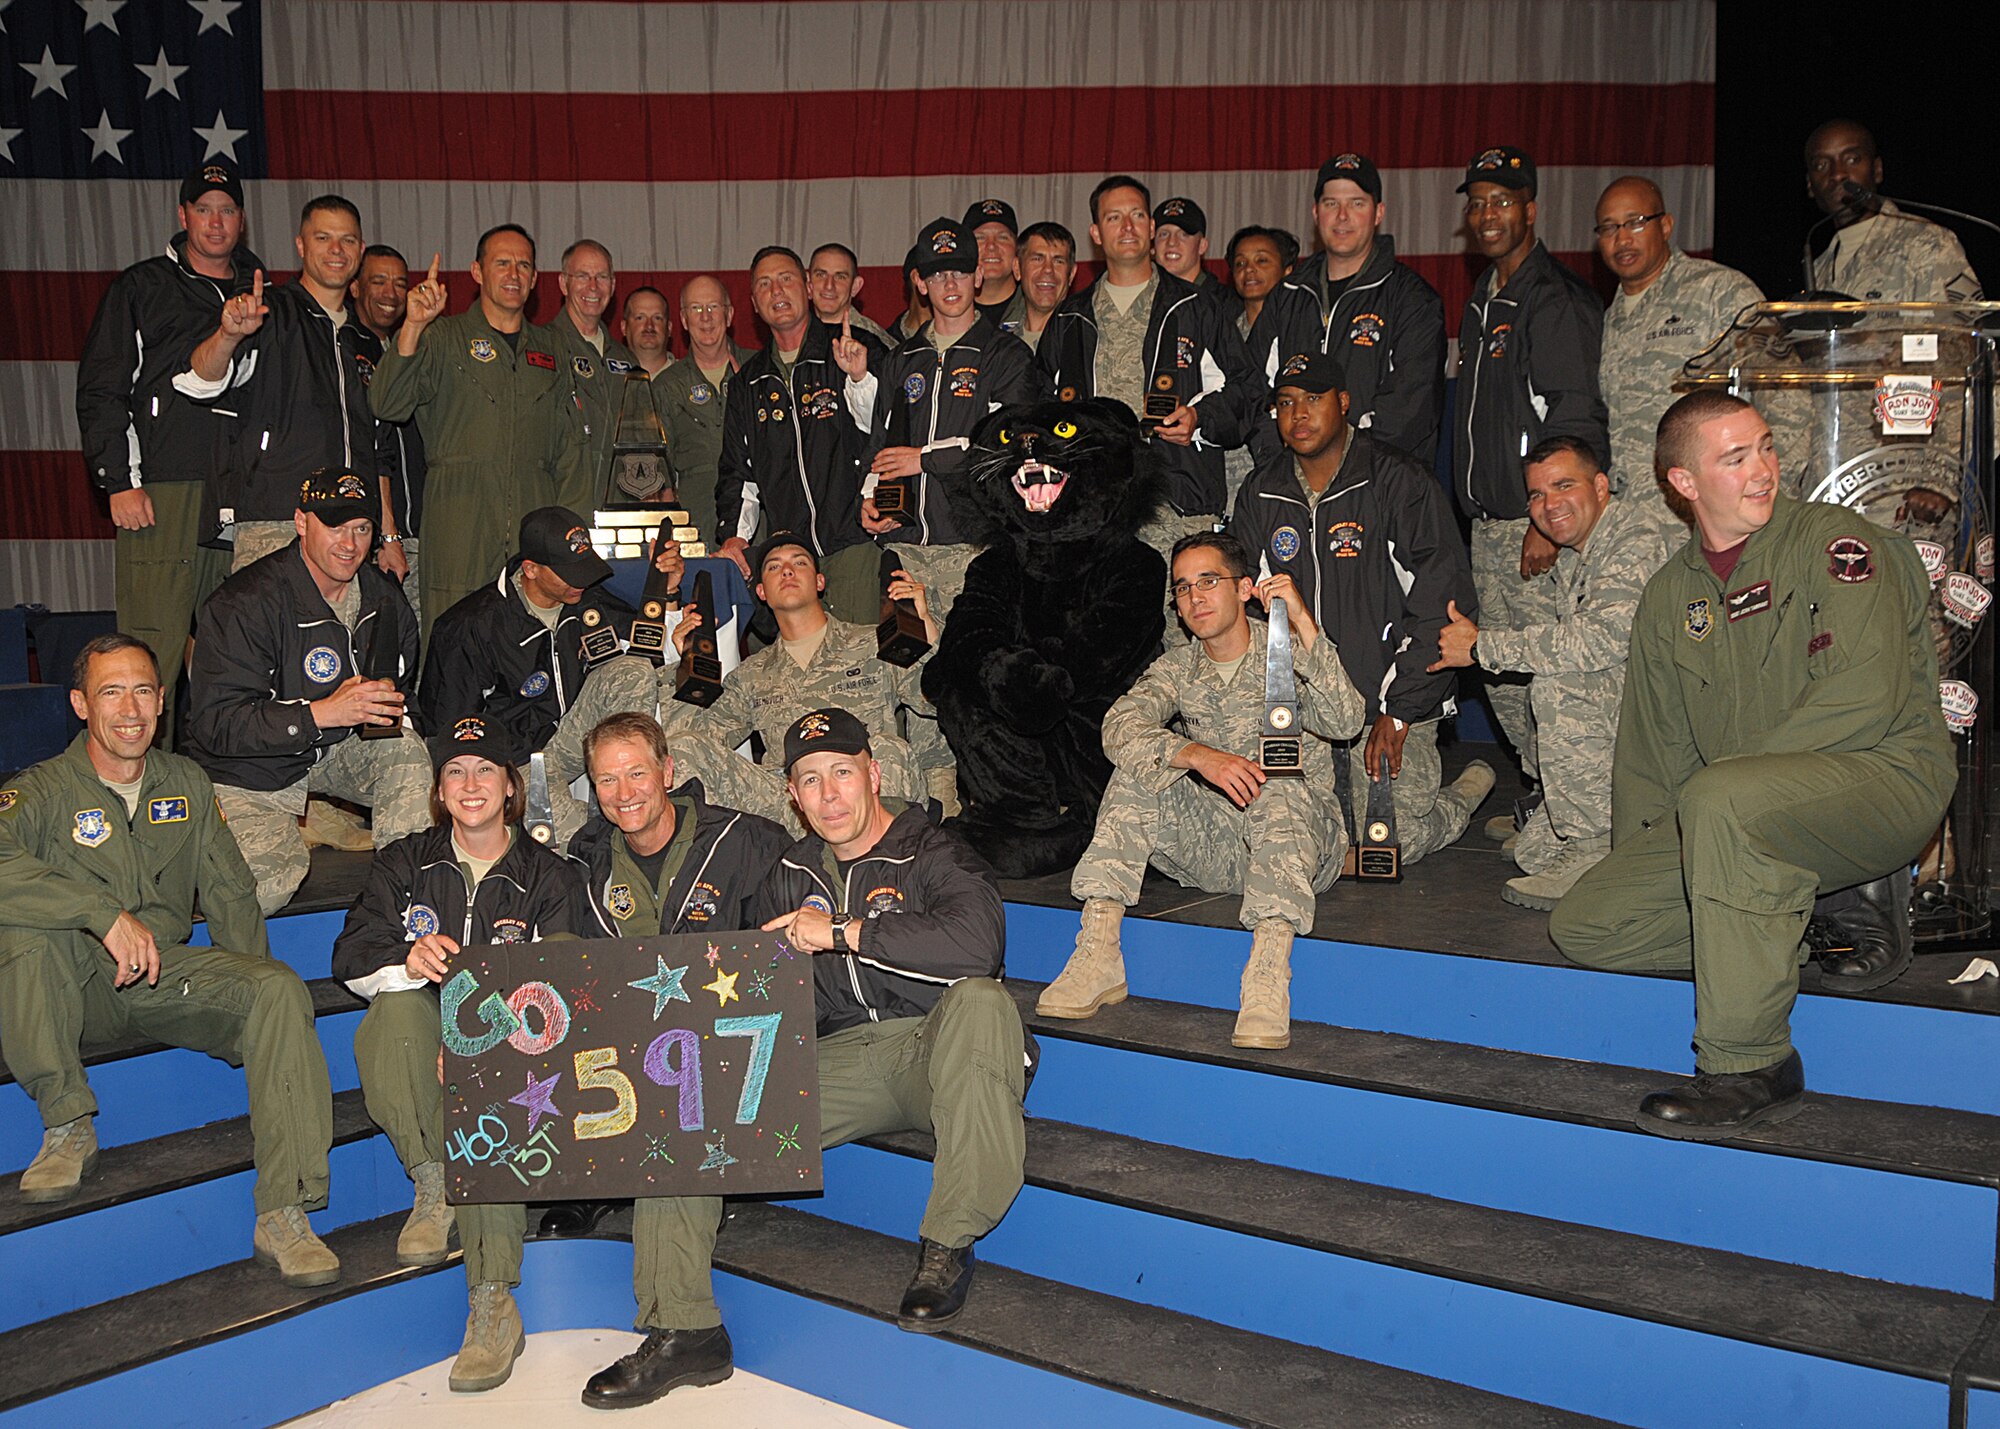 Members of Team Buckley's Guardian Challenge teams and their supporters pose for a group photo at the awards ceremony May 21. (U.S. Air Force photo by Duncan Wood)